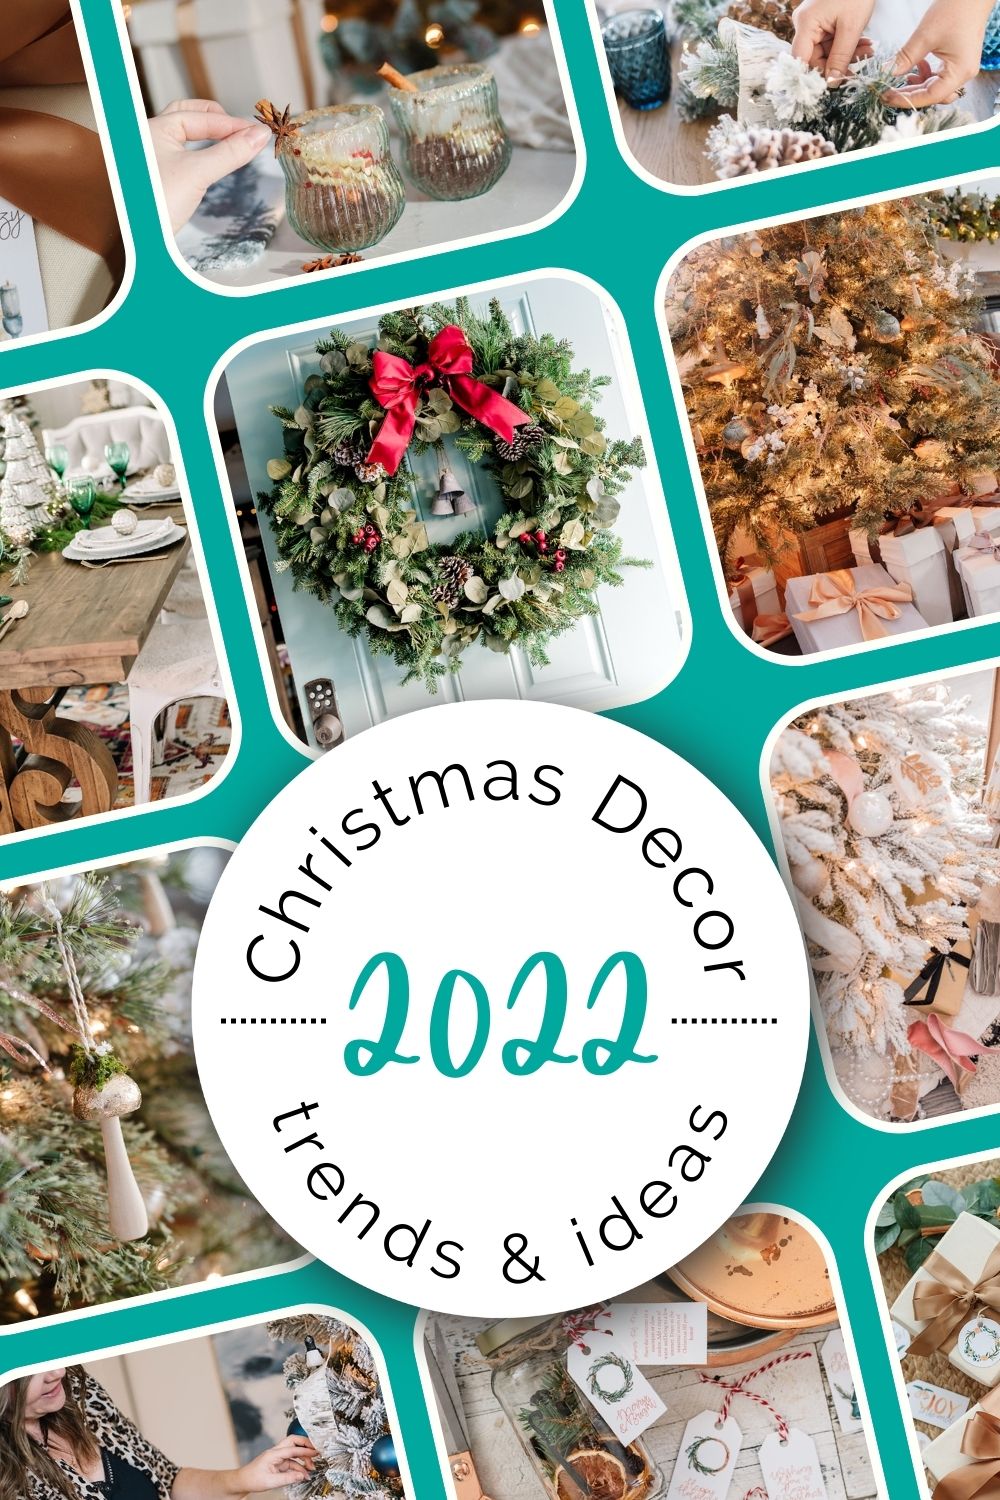 Christmas Decor trends for 2022 & how to get them on a budget